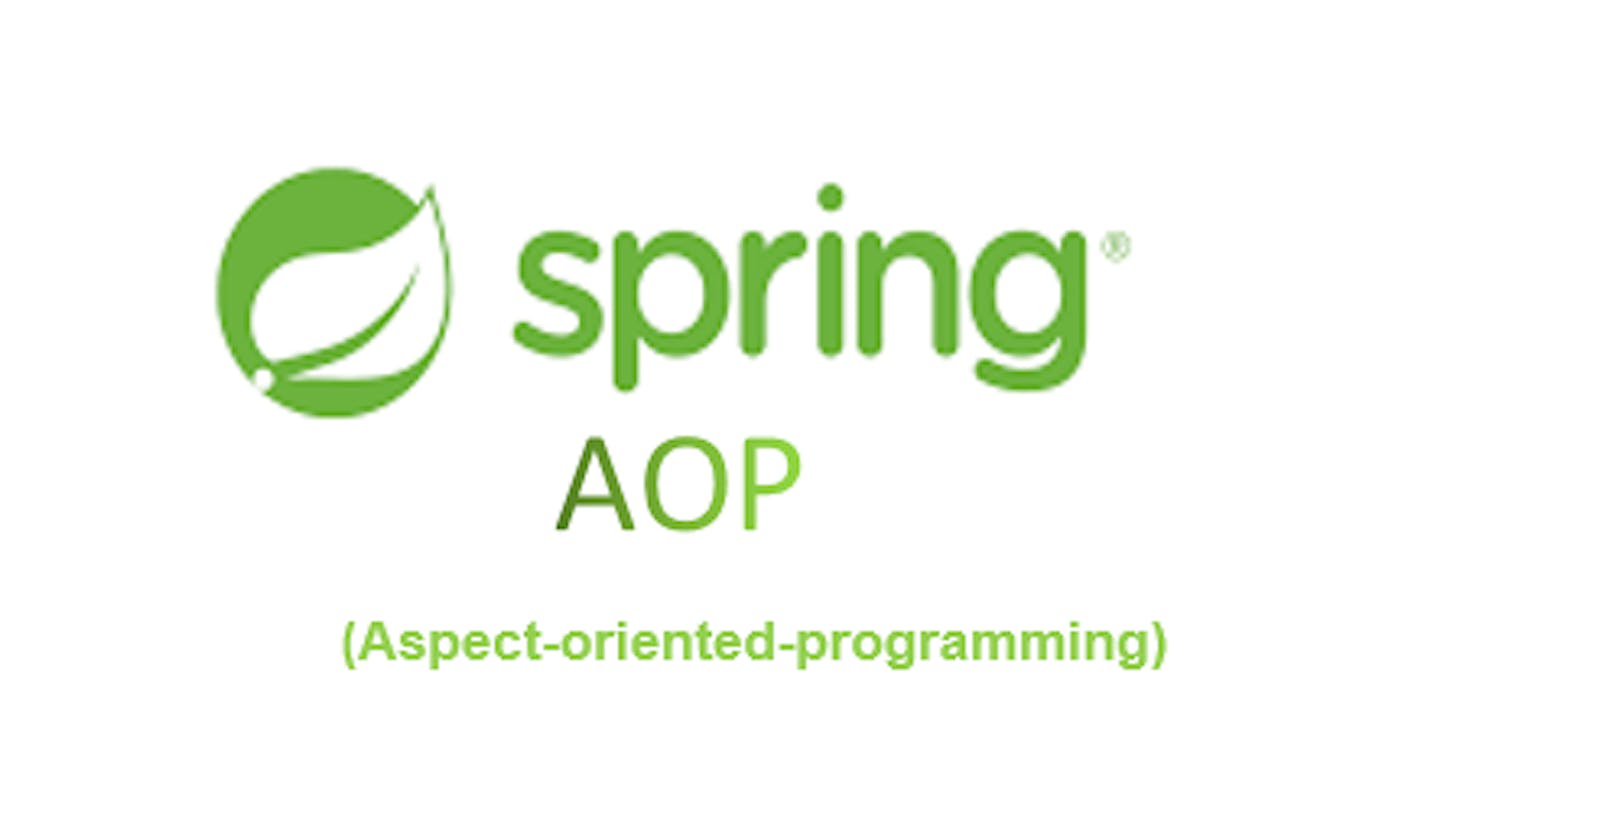 Aspect Oriented Programming with Spring